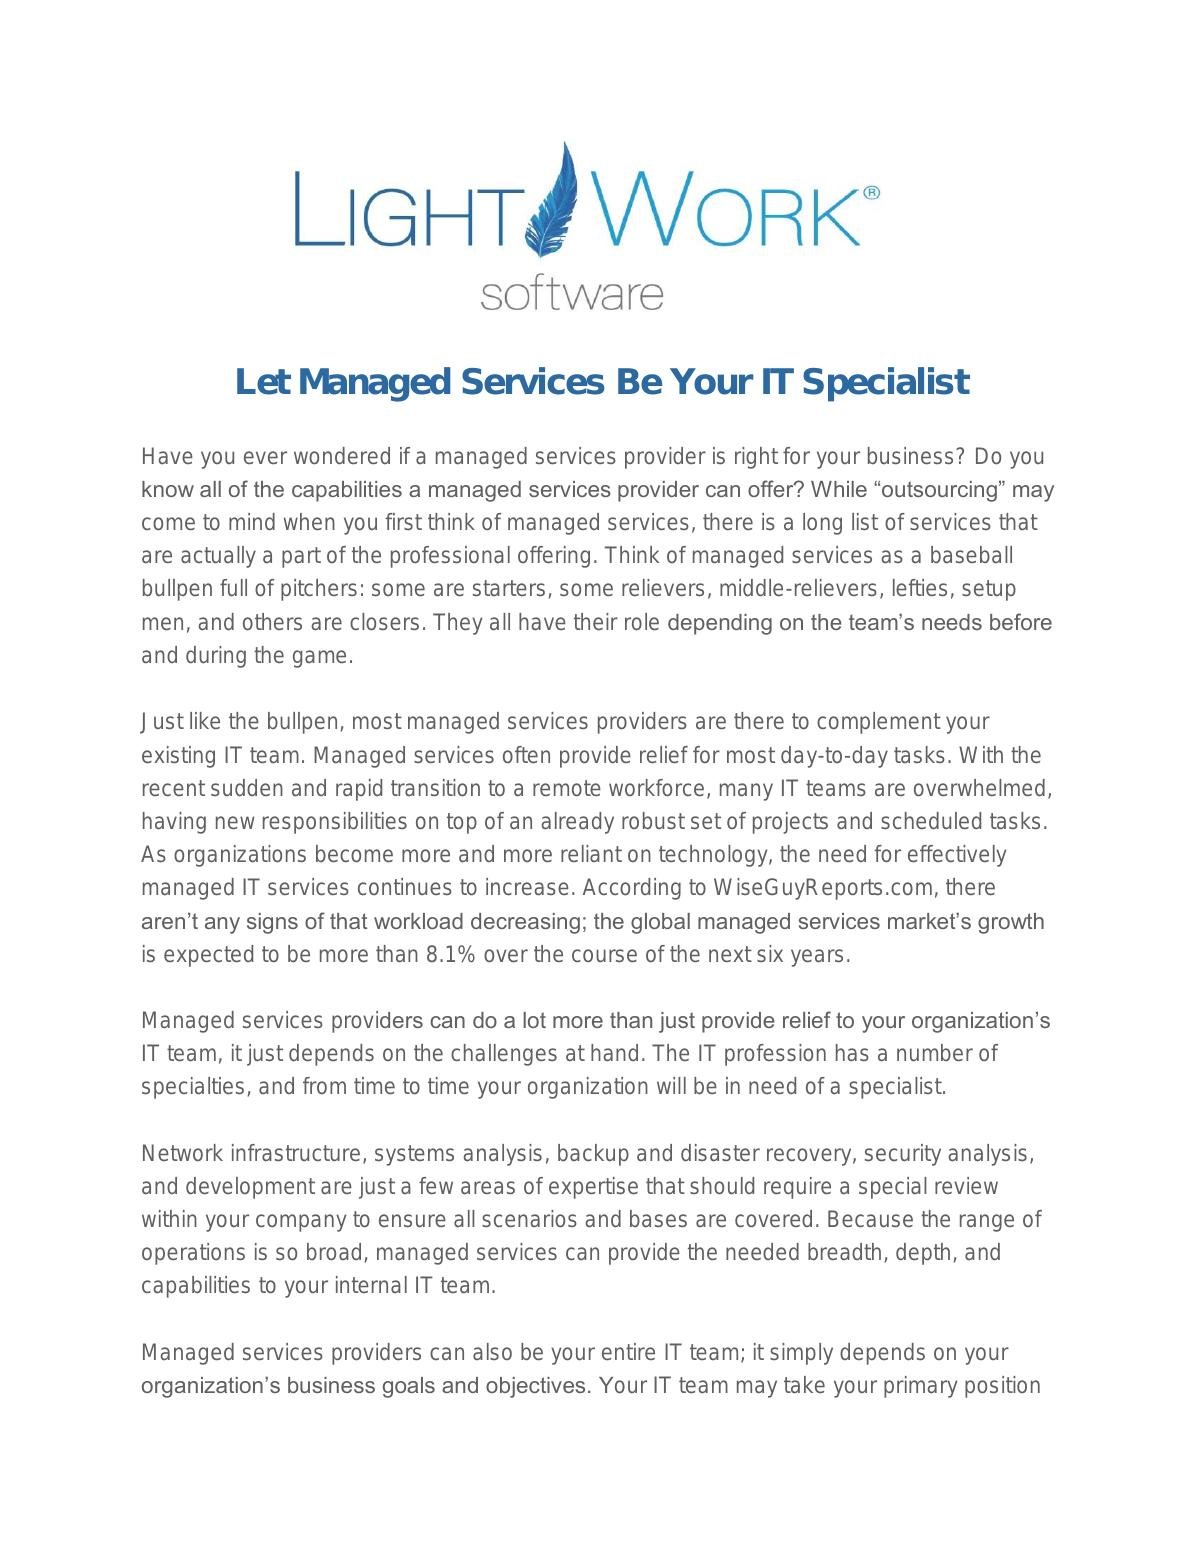 Let Managed Services Be Your IT Specialist